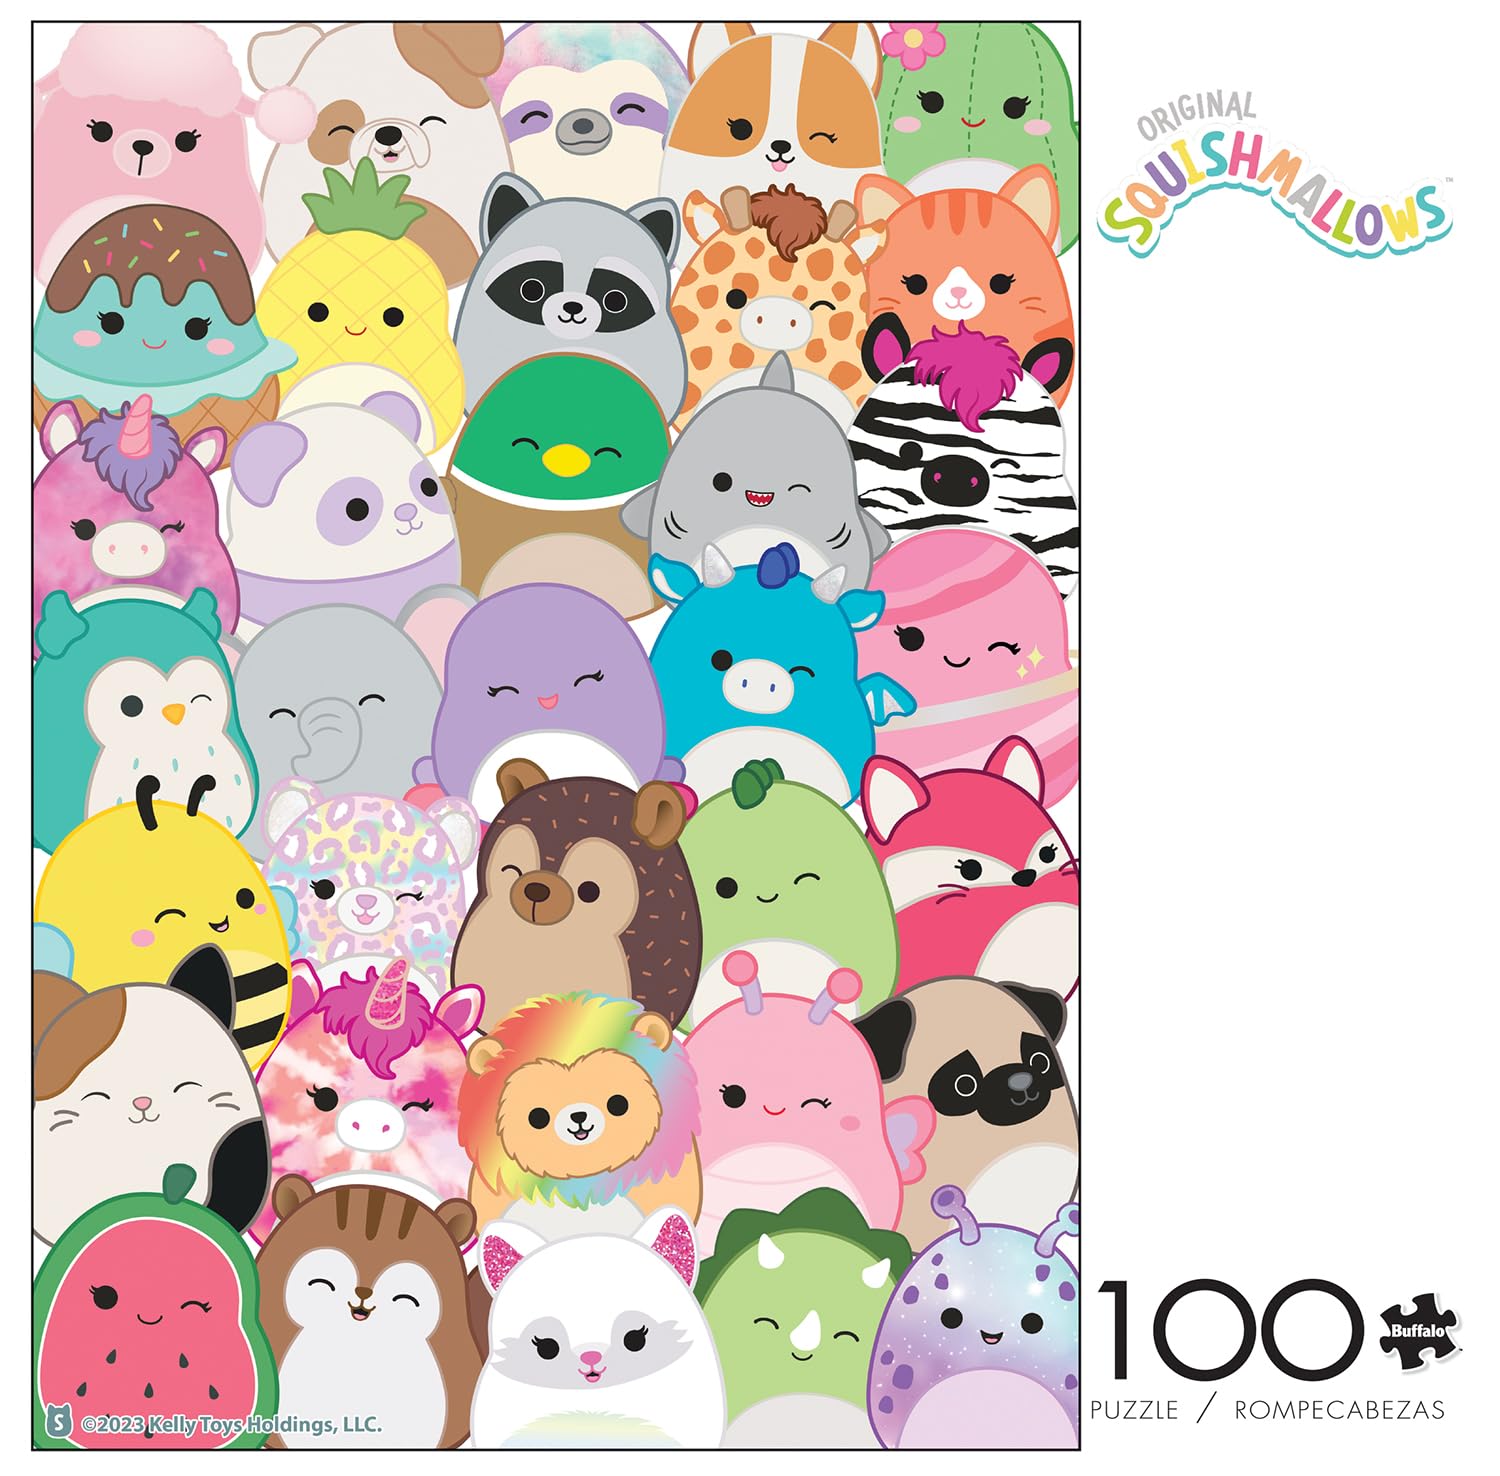 Buffalo Games - Squishmallows - Buddies - 100 Piece Jigsaw Puzzle for Families Kids Puzzle Perfect for Game Nights - Finished Size 15.00 x 11.00